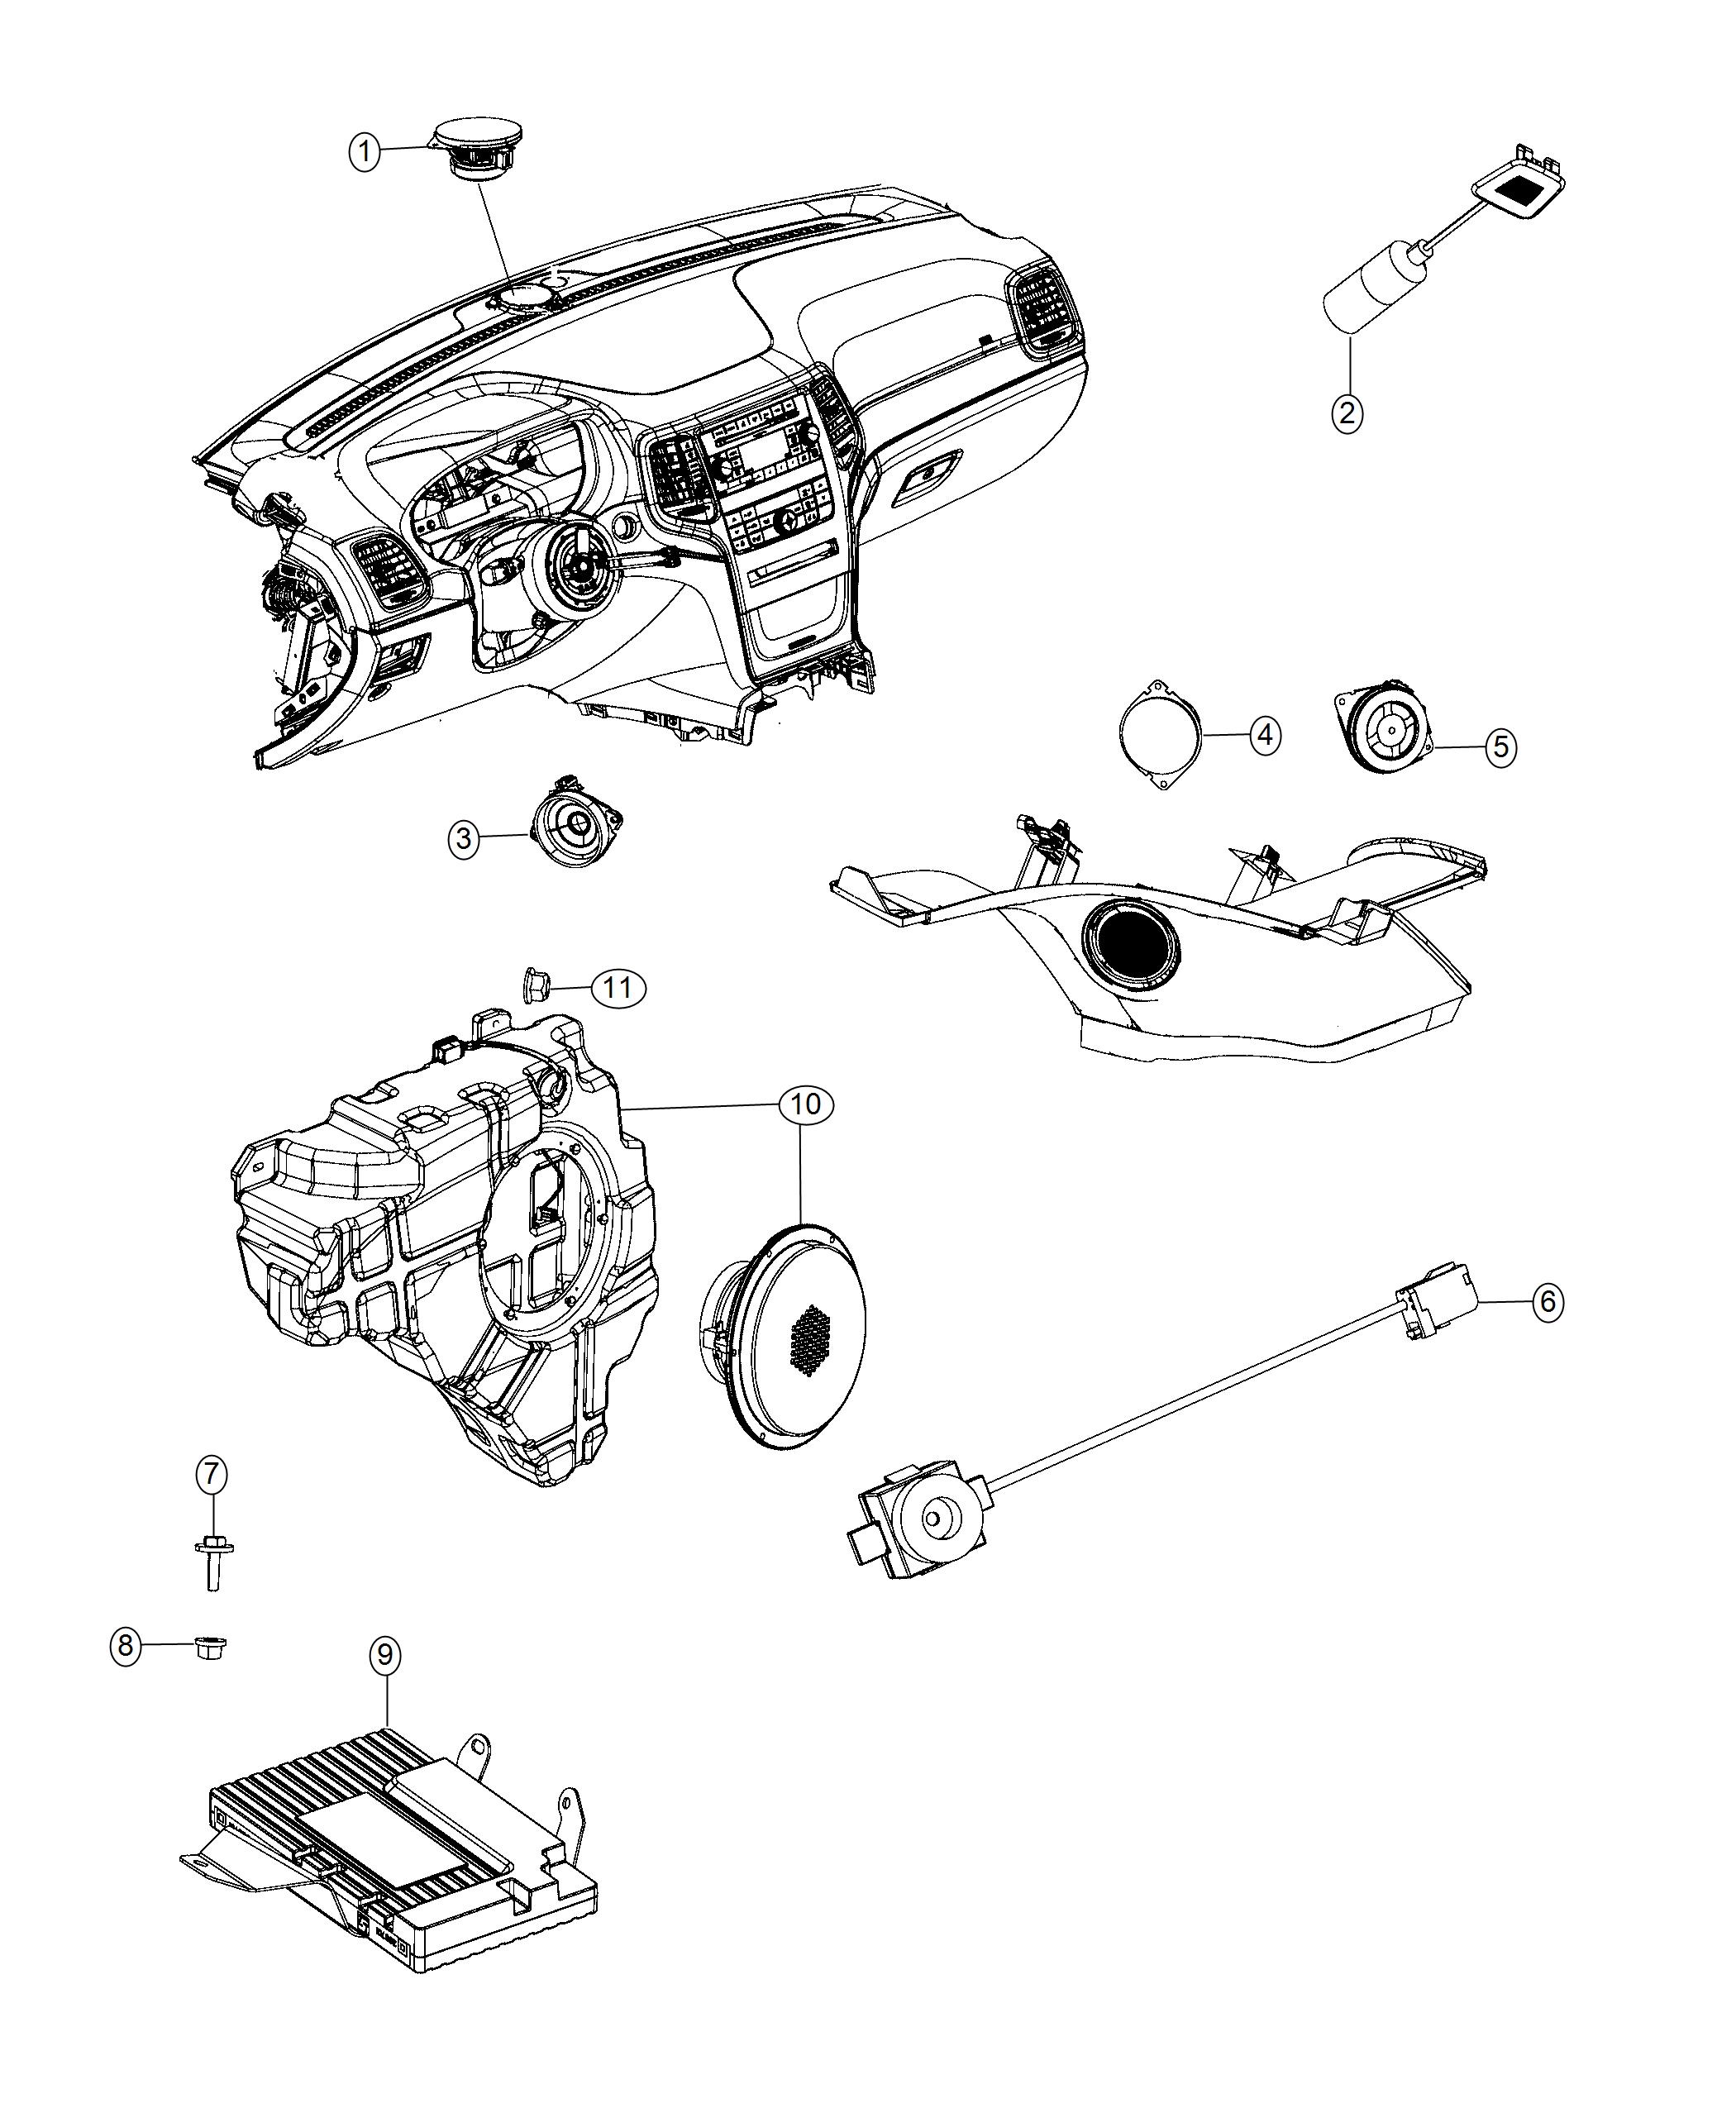 Speakers, Instrument Panel and Quarters and Amplifiers. Diagram